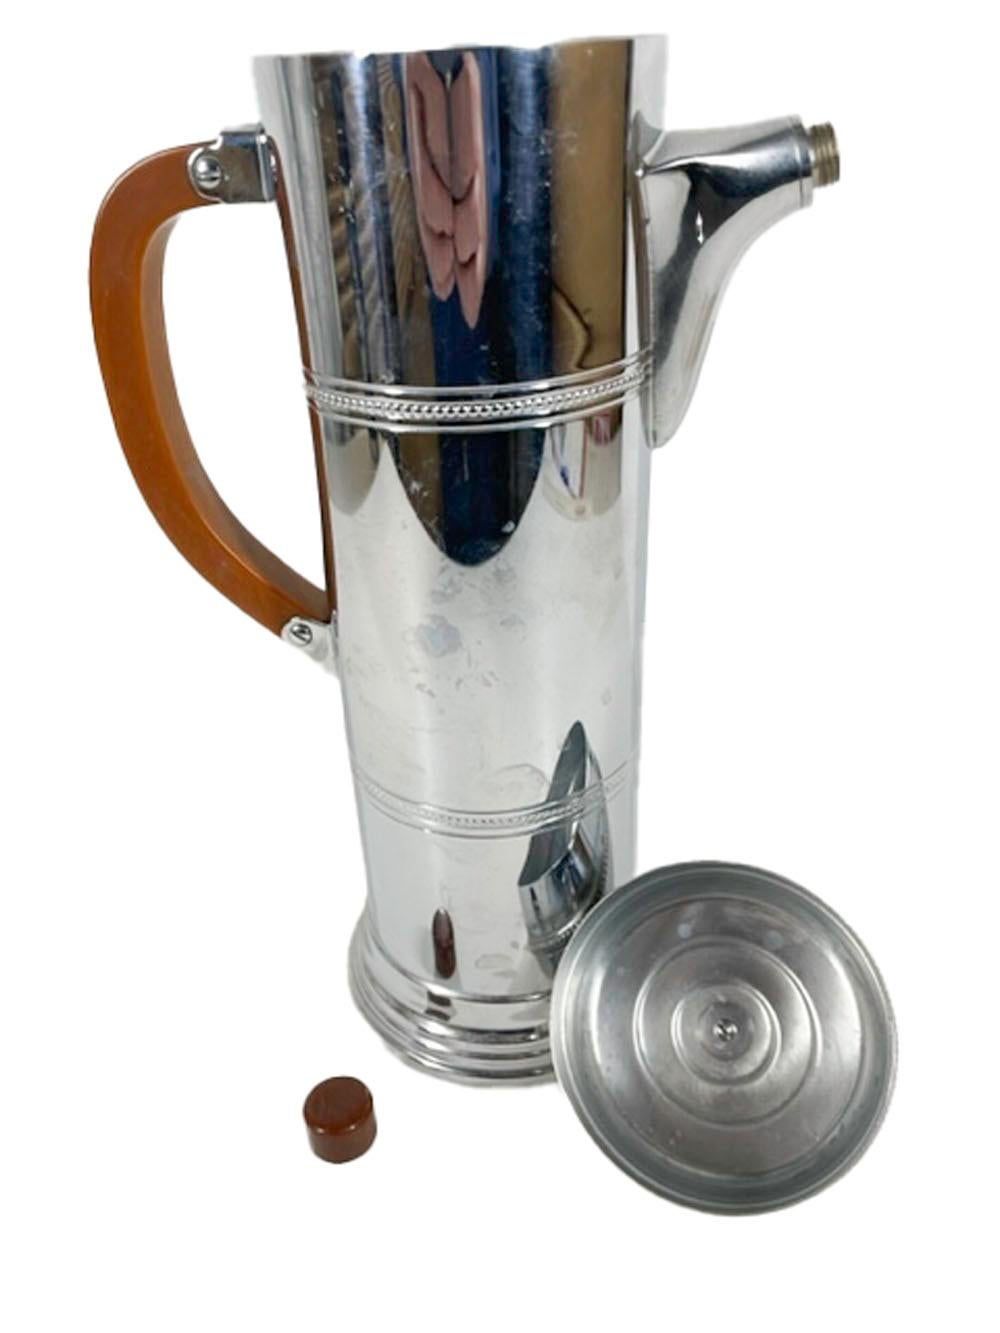 Art Deco chrome cocktail shaker of cylindrical form with beaded bands attributed to the Krome-Kraft division of Farber Brothers. Having a chocolate Bakelite handle as well as lid and spout knobs.